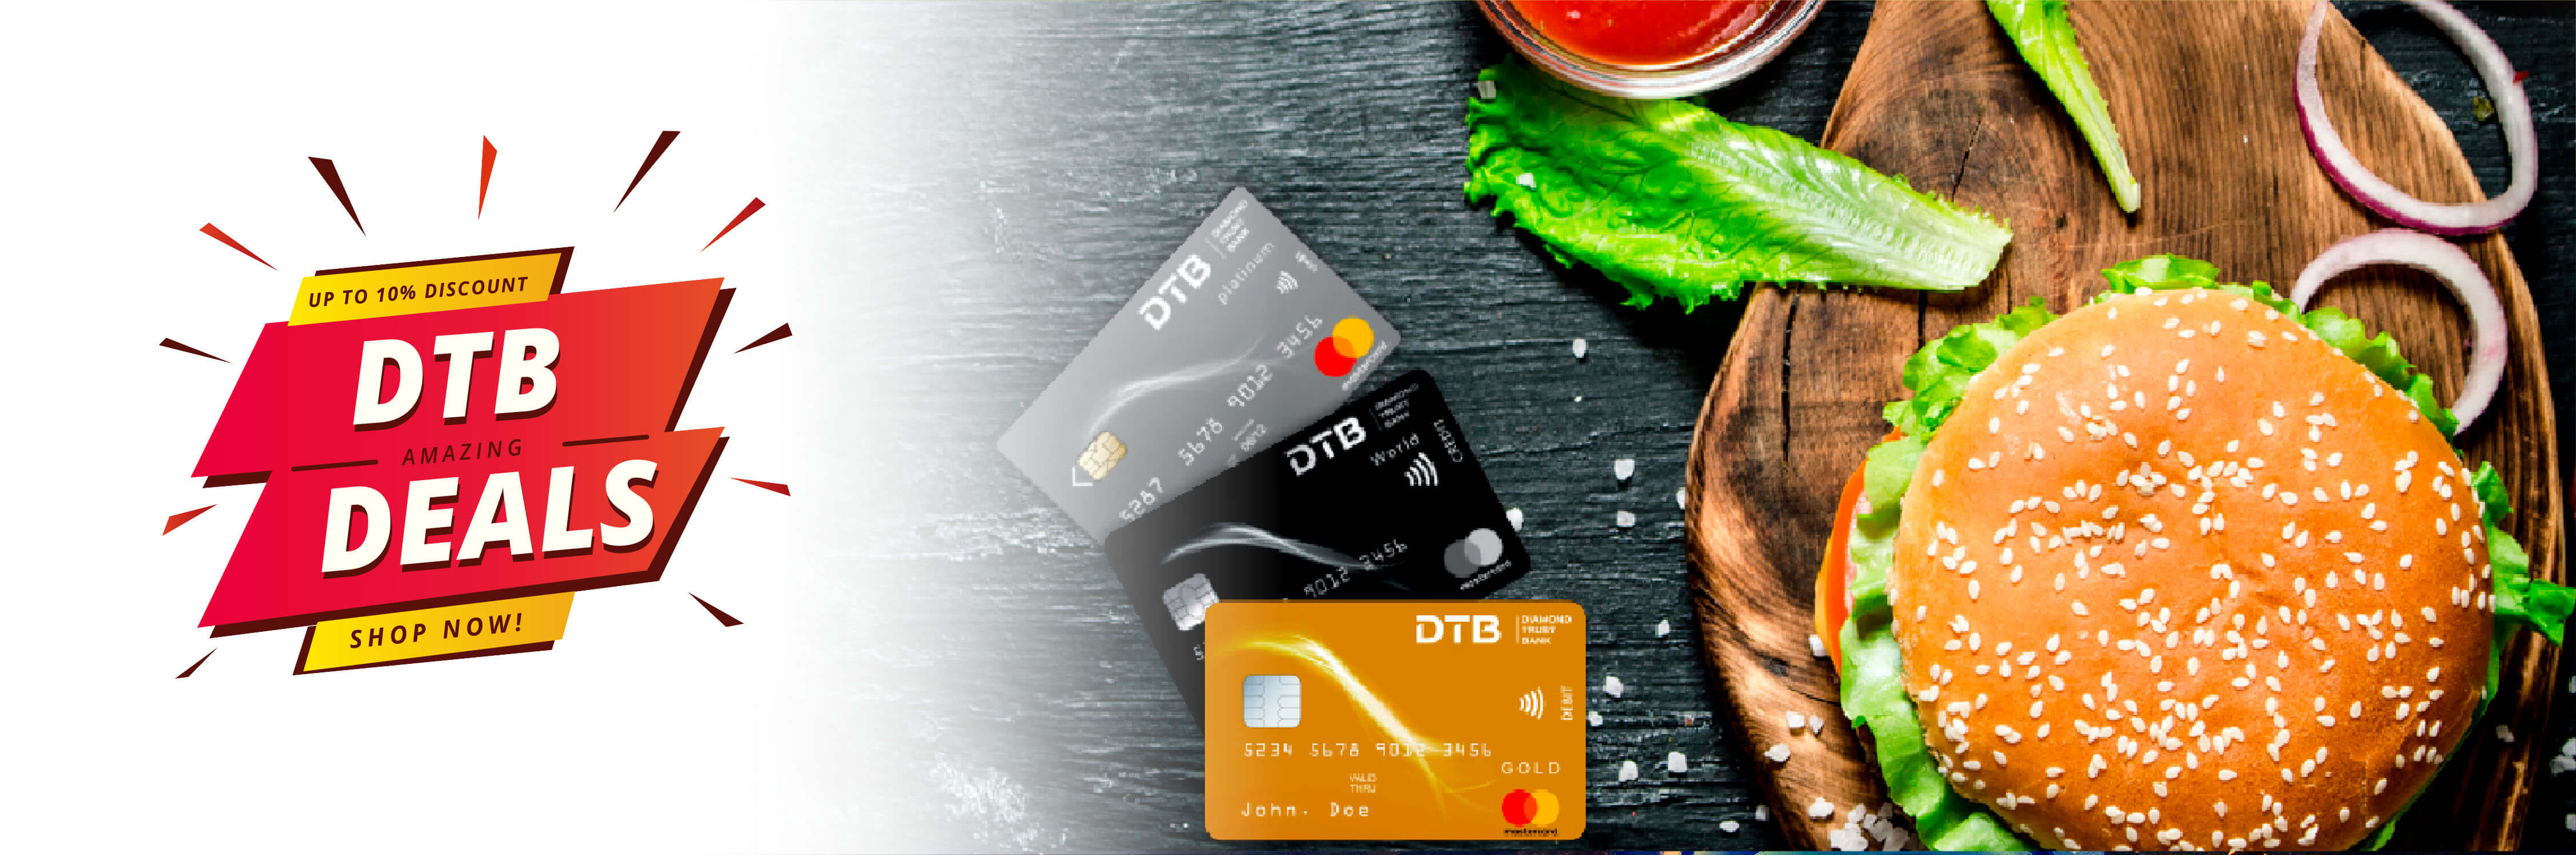 Enjoy Deals and offers thanks to your DTB Mastercard